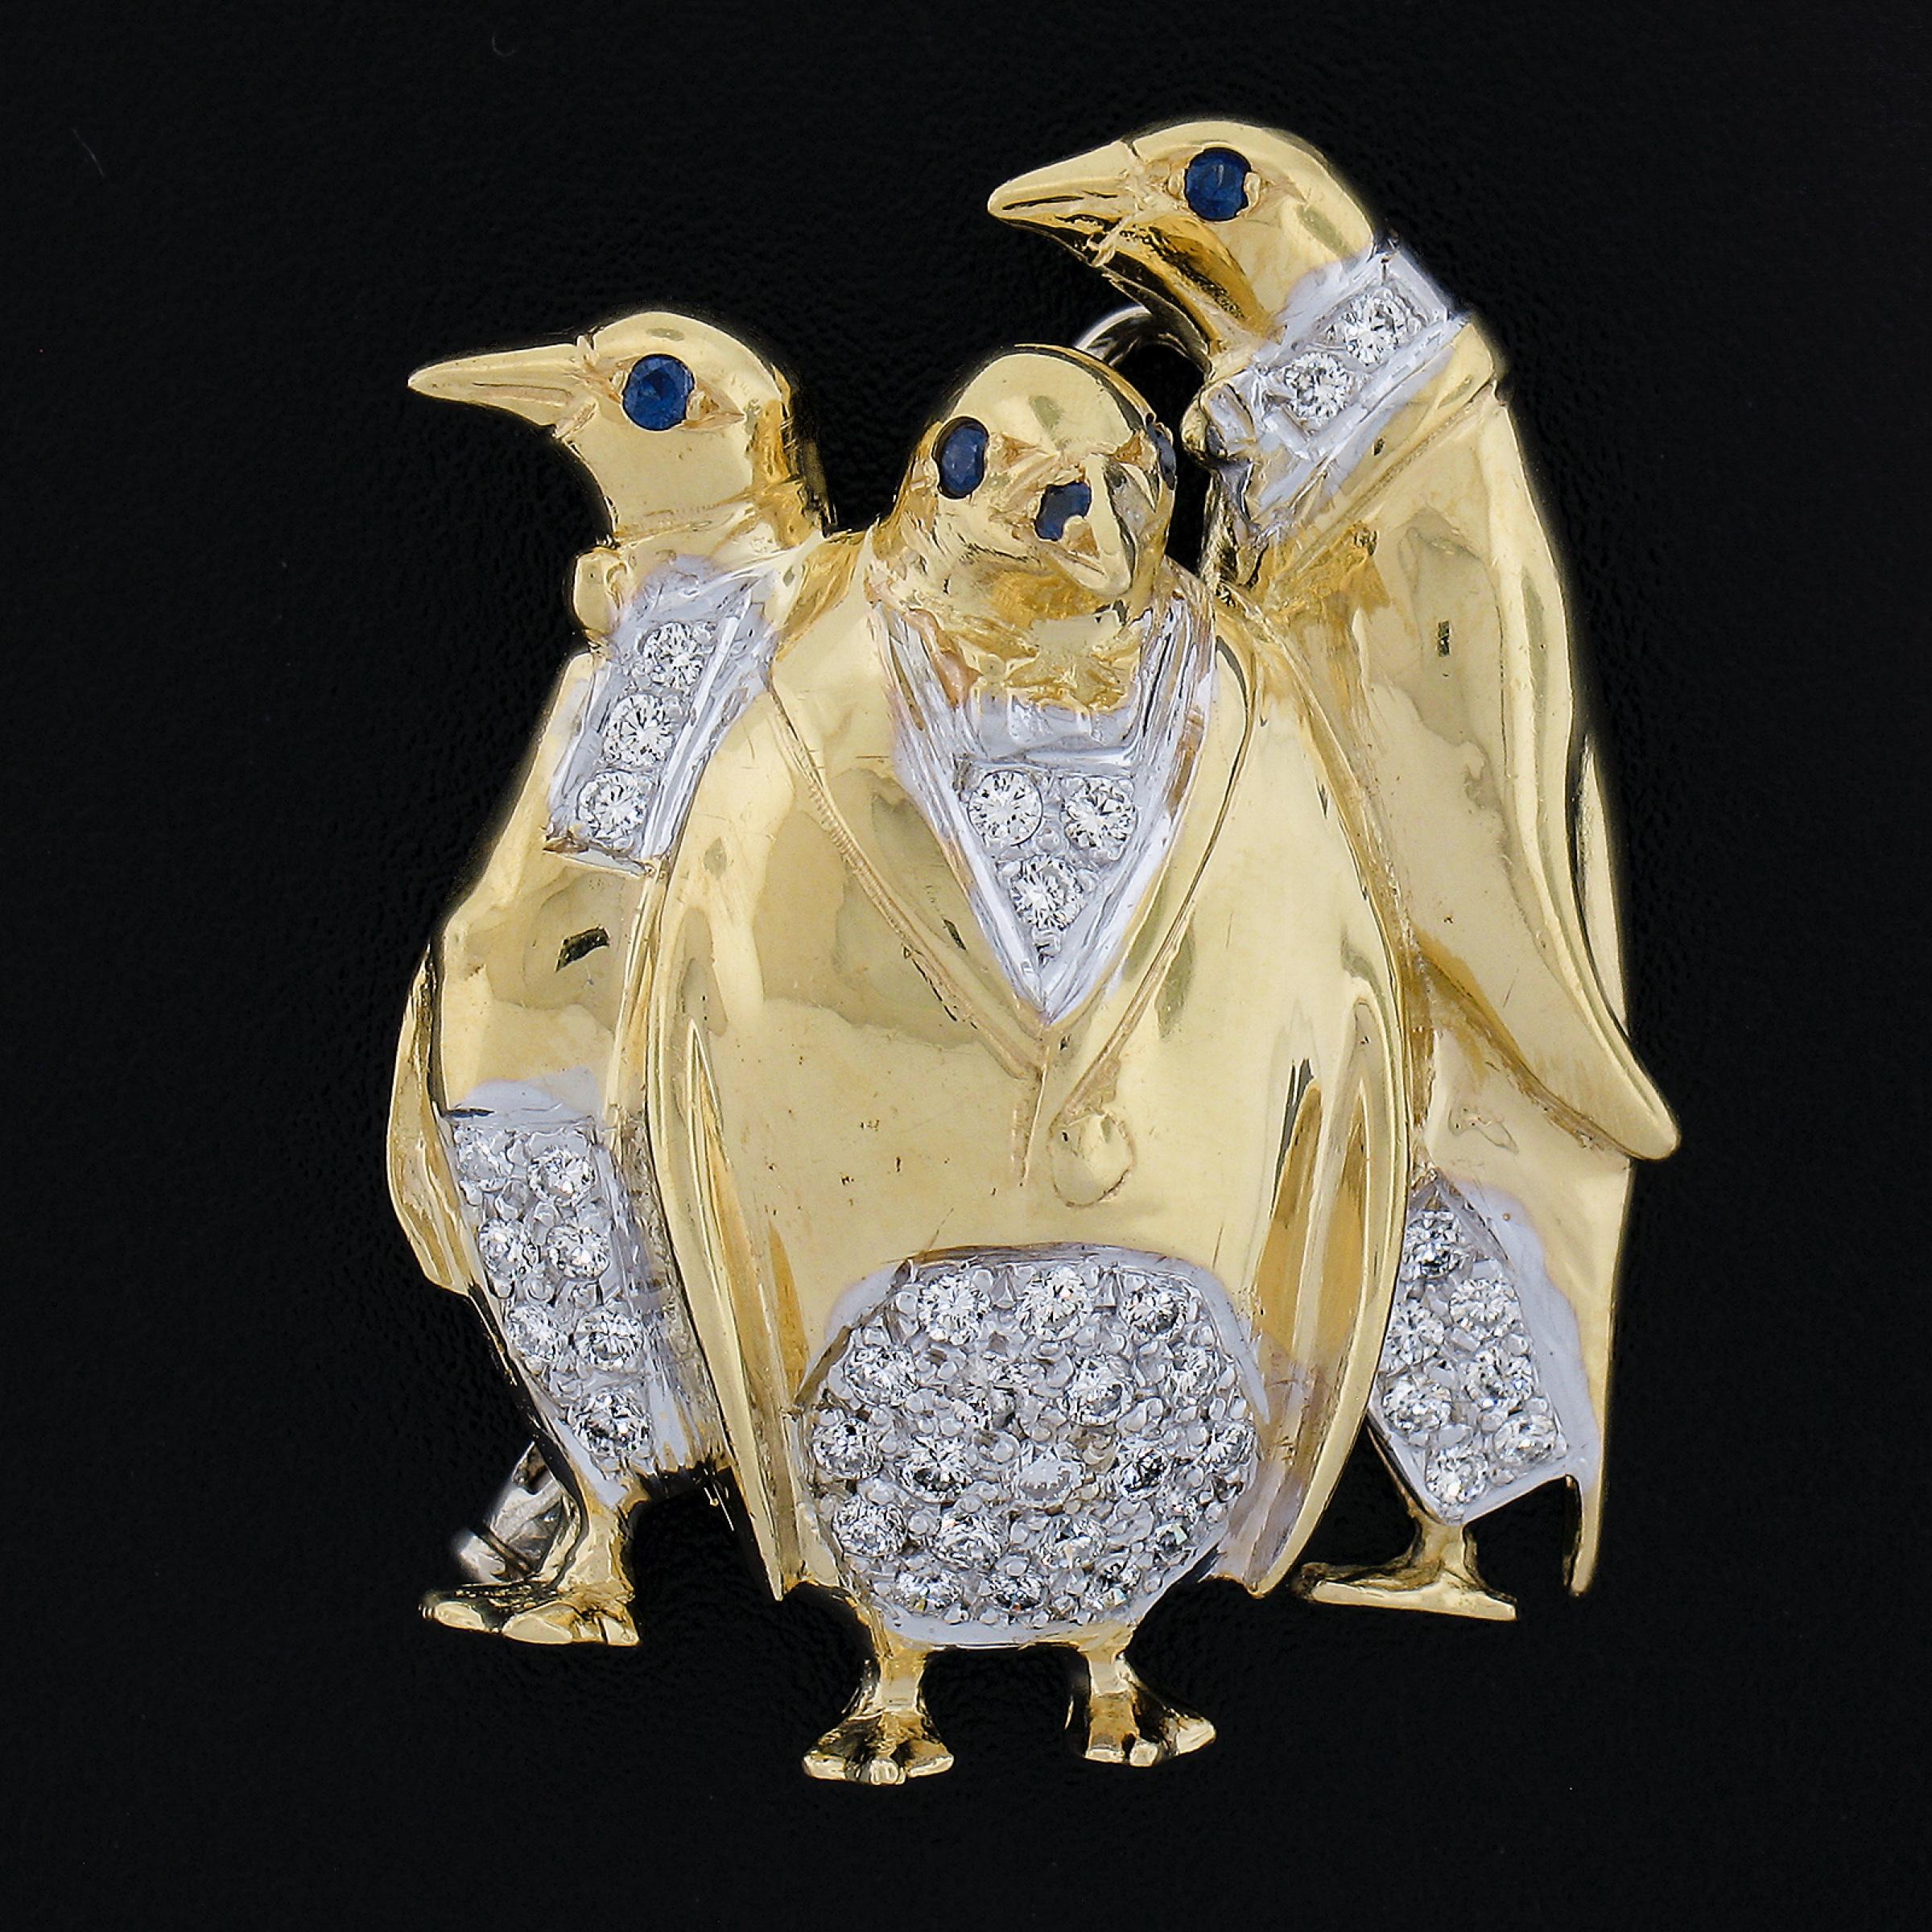 Very unique and magical 3 penguin in tuxedos pin! Well executed with the perfect amount of high quality diamonds and attention to detail! The result is a pin that will start conversations and turn heads! Enjoy!

--Stone(s):--
(41) Natural Genuine